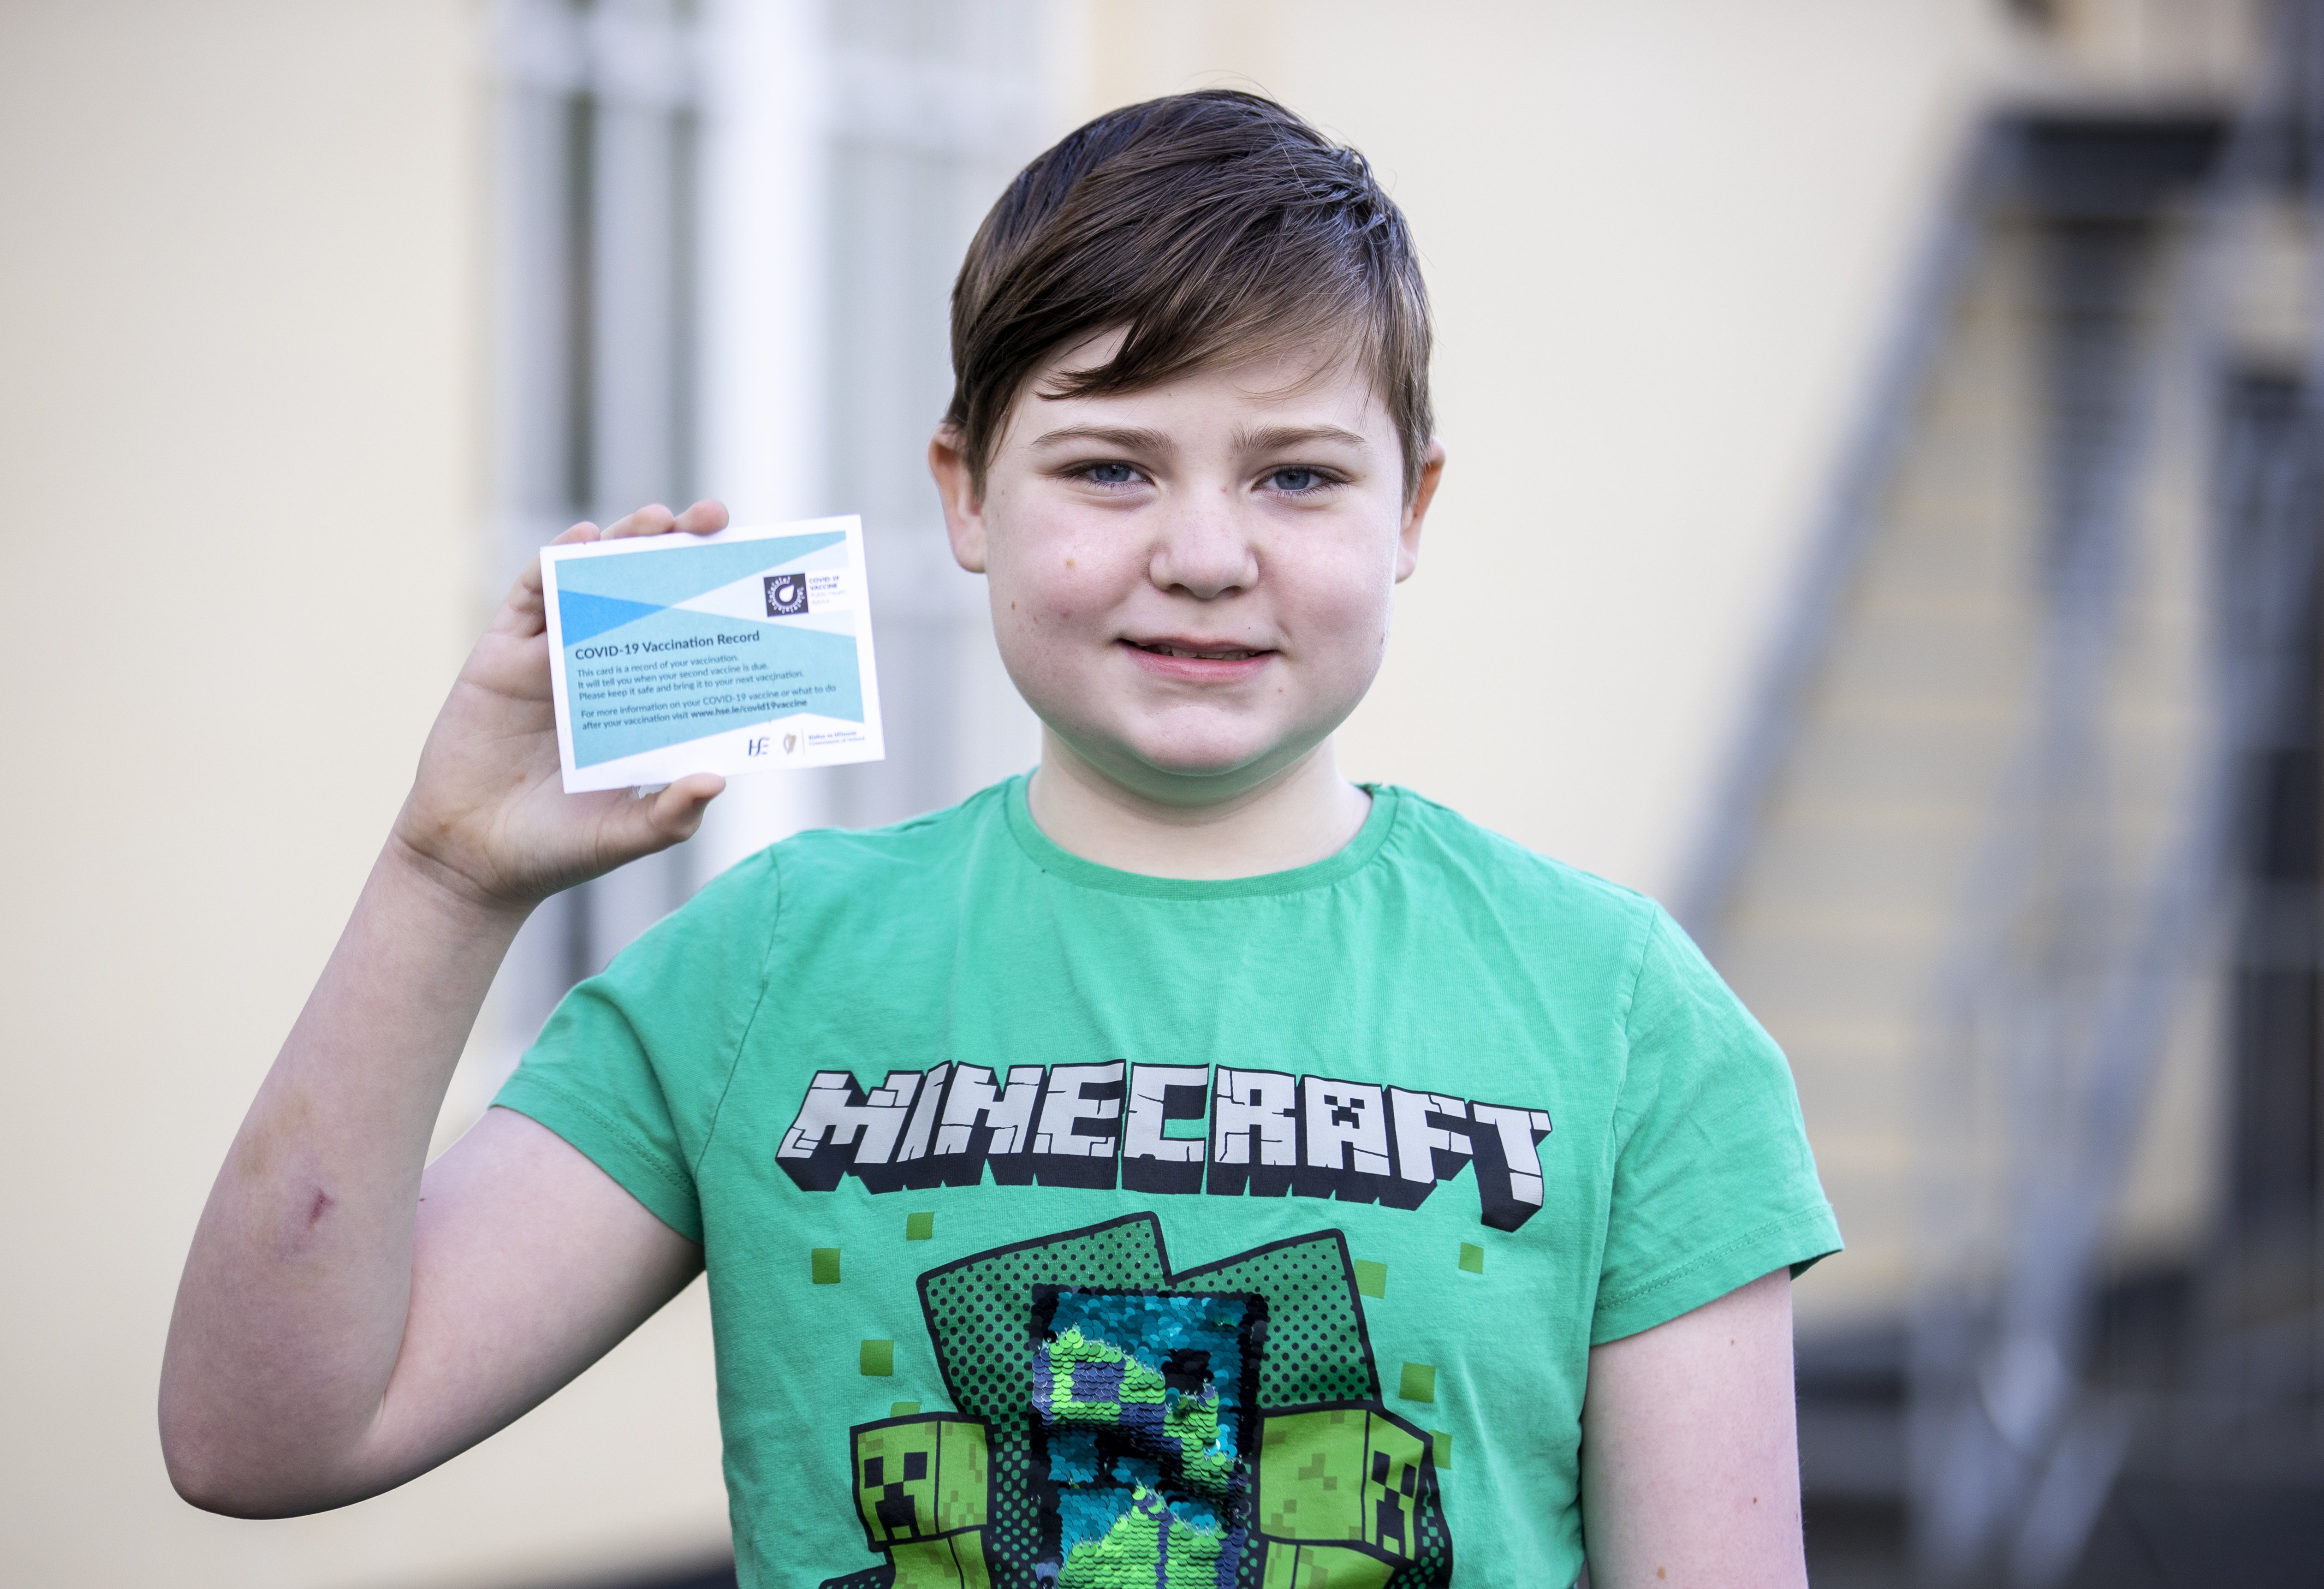 Leo McGeough, 12, with his vaccination card (Liam McBurney/PA)